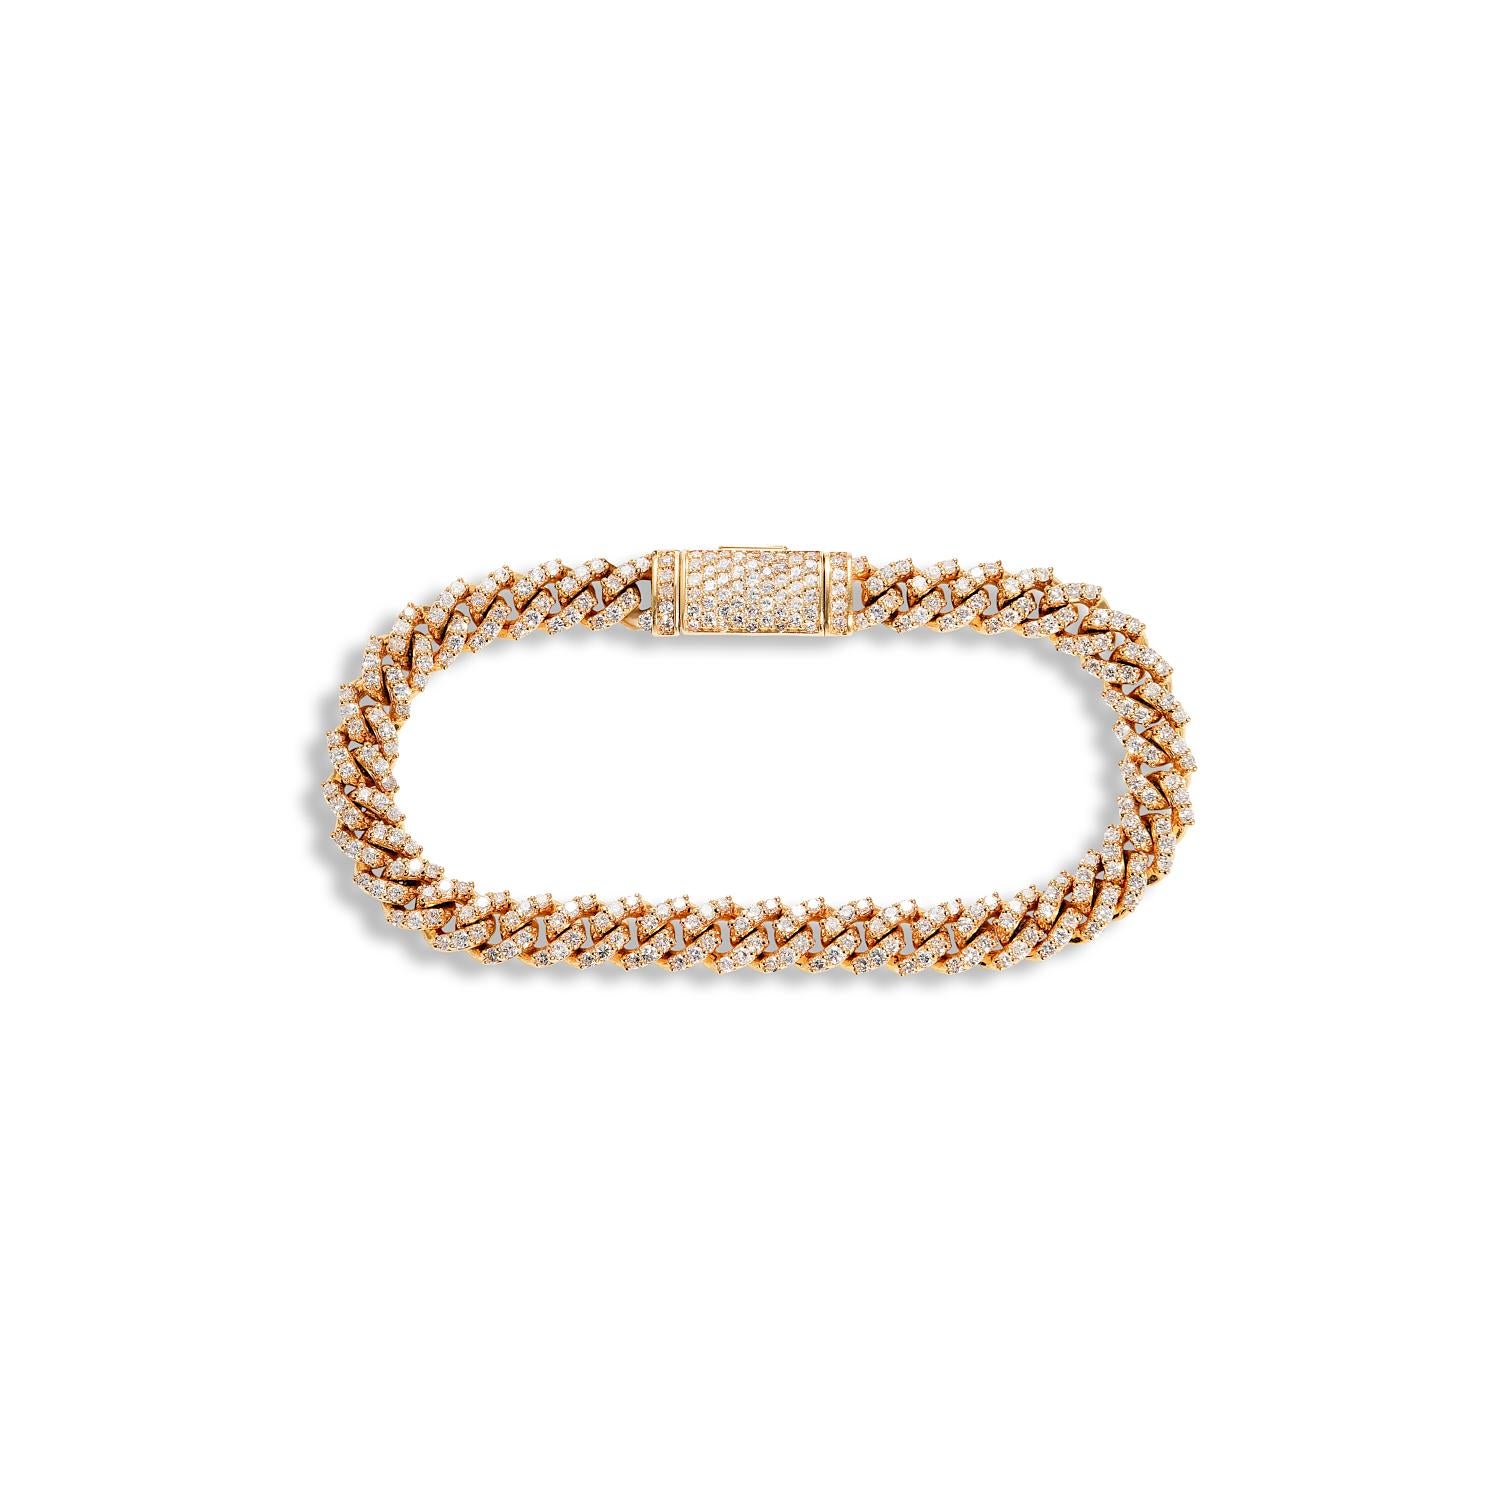 The Mateo Men’s 5 Carat Diamond Cuban Link Chain Bracelet features Round Brilliant Cut DIAMONDS brilliants weighing a total of approximately 5.58 Carats, set in 14 Karat Yellow Gold .

Style:
Diamonds
Diamond Size: 5.58 Carats
Diamond Shape: Round